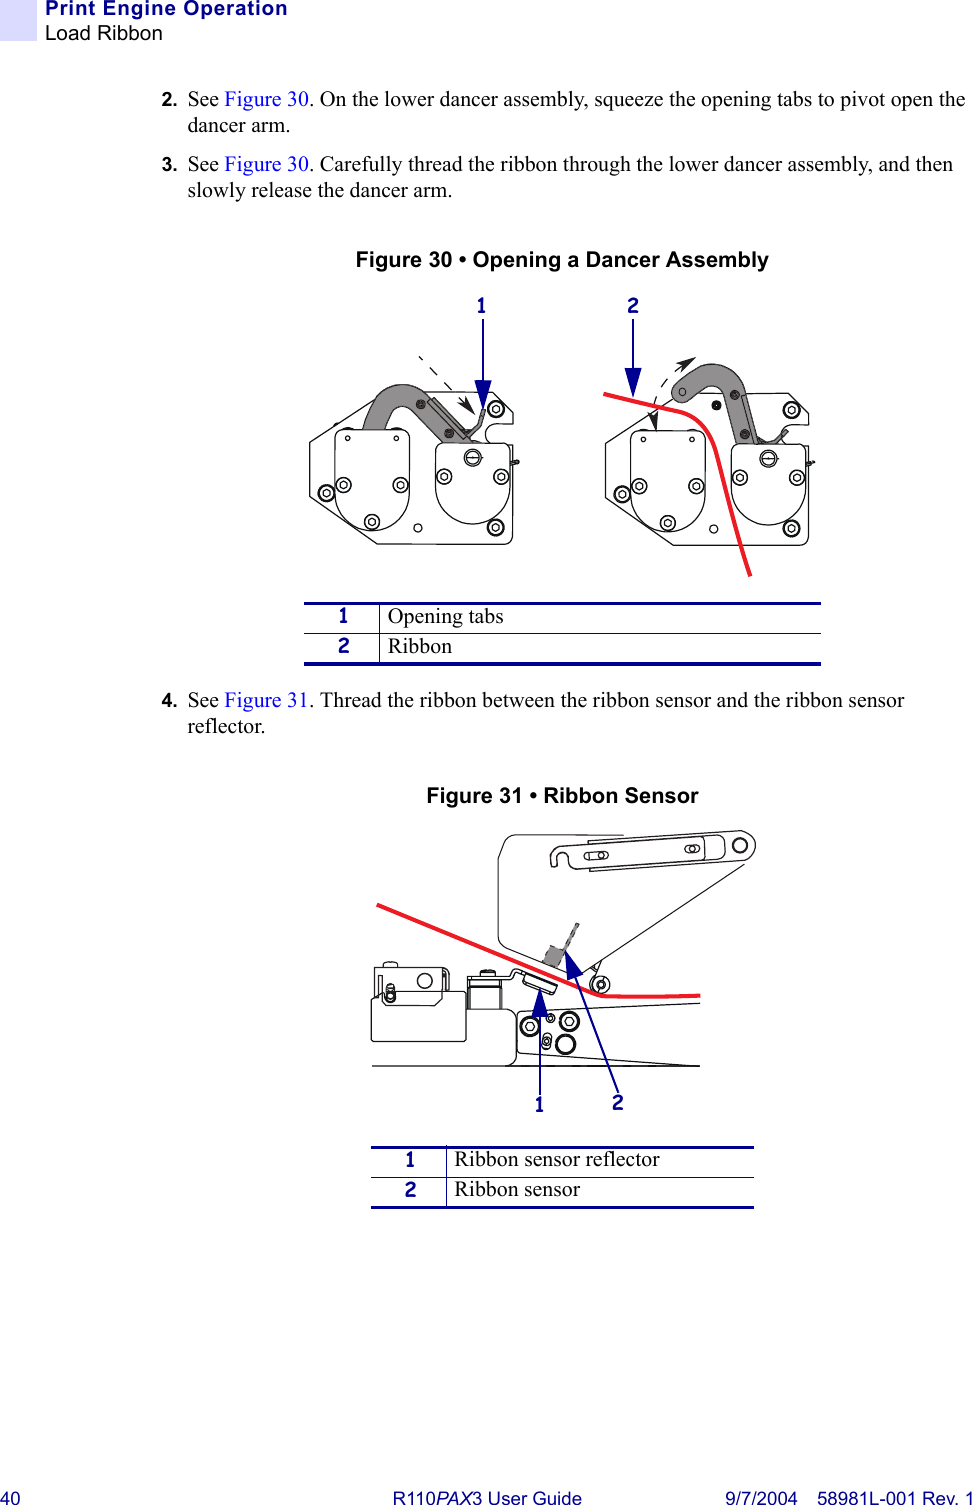 40 R110PA X 3 User Guide 9/7/2004 58981L-001 Rev. 1Print Engine OperationLoad Ribbon2. See Figure 30. On the lower dancer assembly, squeeze the opening tabs to pivot open the dancer arm.3. See Figure 30. Carefully thread the ribbon through the lower dancer assembly, and then slowly release the dancer arm.Figure 30 • Opening a Dancer Assembly4. See Figure 31. Thread the ribbon between the ribbon sensor and the ribbon sensor reflector.Figure 31 • Ribbon Sensor1Opening tabs2Ribbon1Ribbon sensor reflector2Ribbon sensor1 221